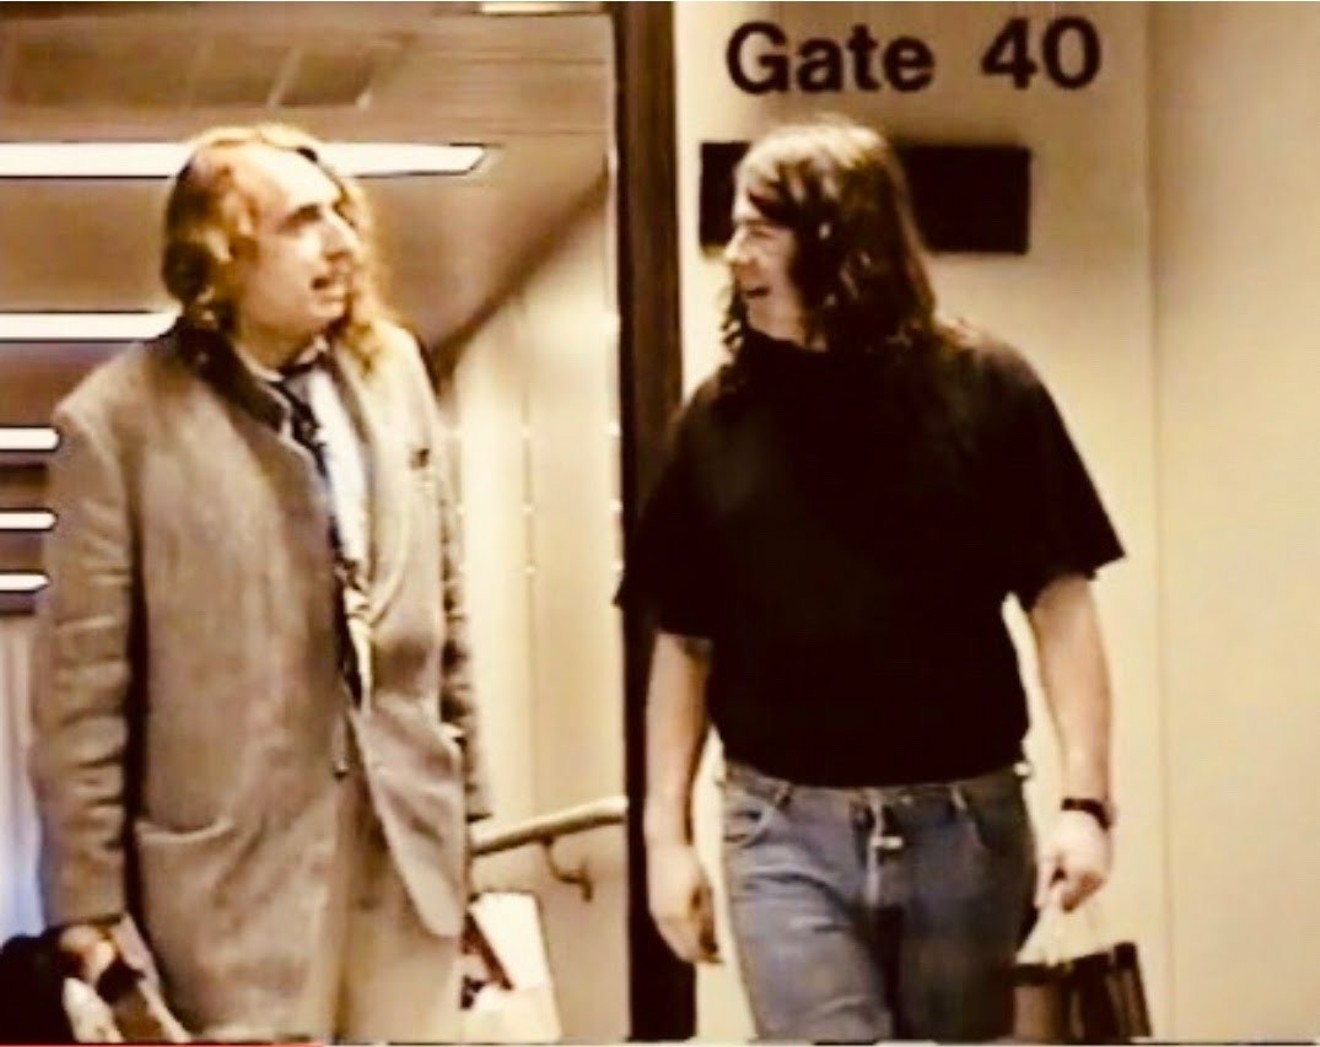 Bucks Burnett (right) picks up legendary musician Tiny Tim (left) at the airport in 1990 for one of Tiny's many concerts in North Texas. Burnett managed Tiny's career for the final third period of the pop star's career.